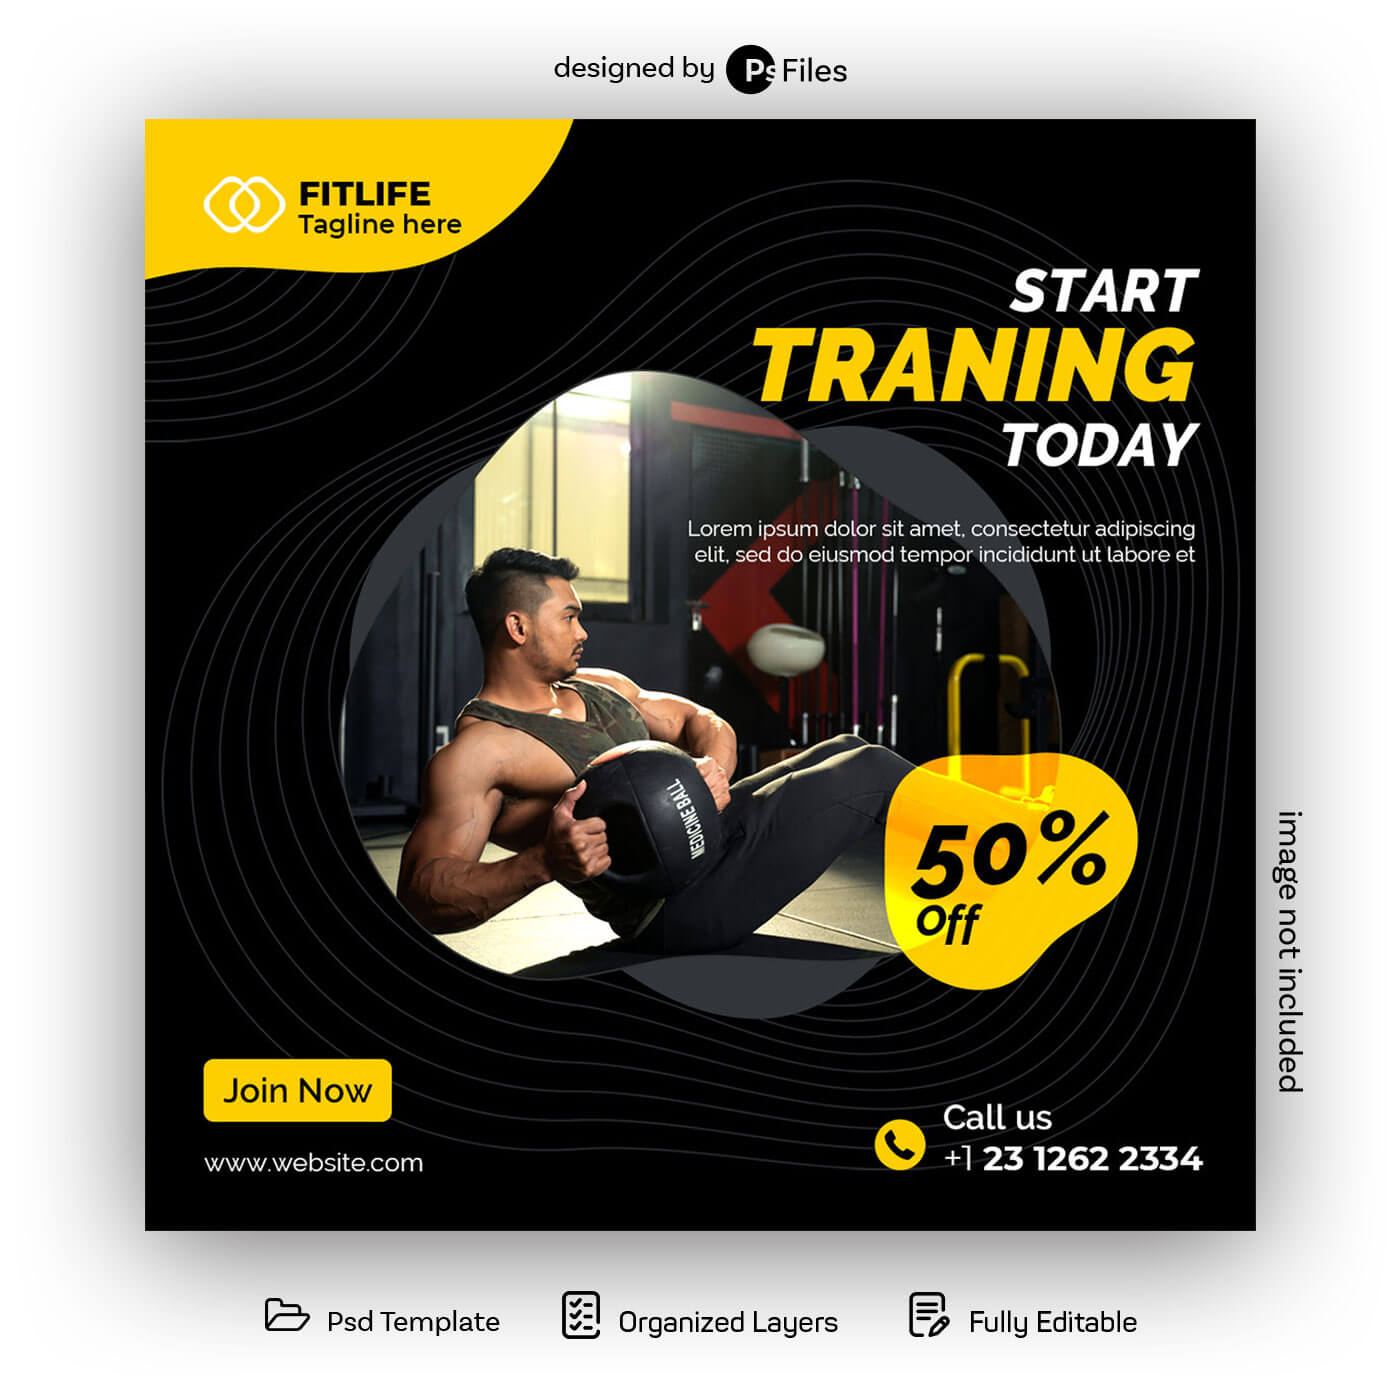 PsFiles Free Fitness Gym Training Social Media Post PSD Template